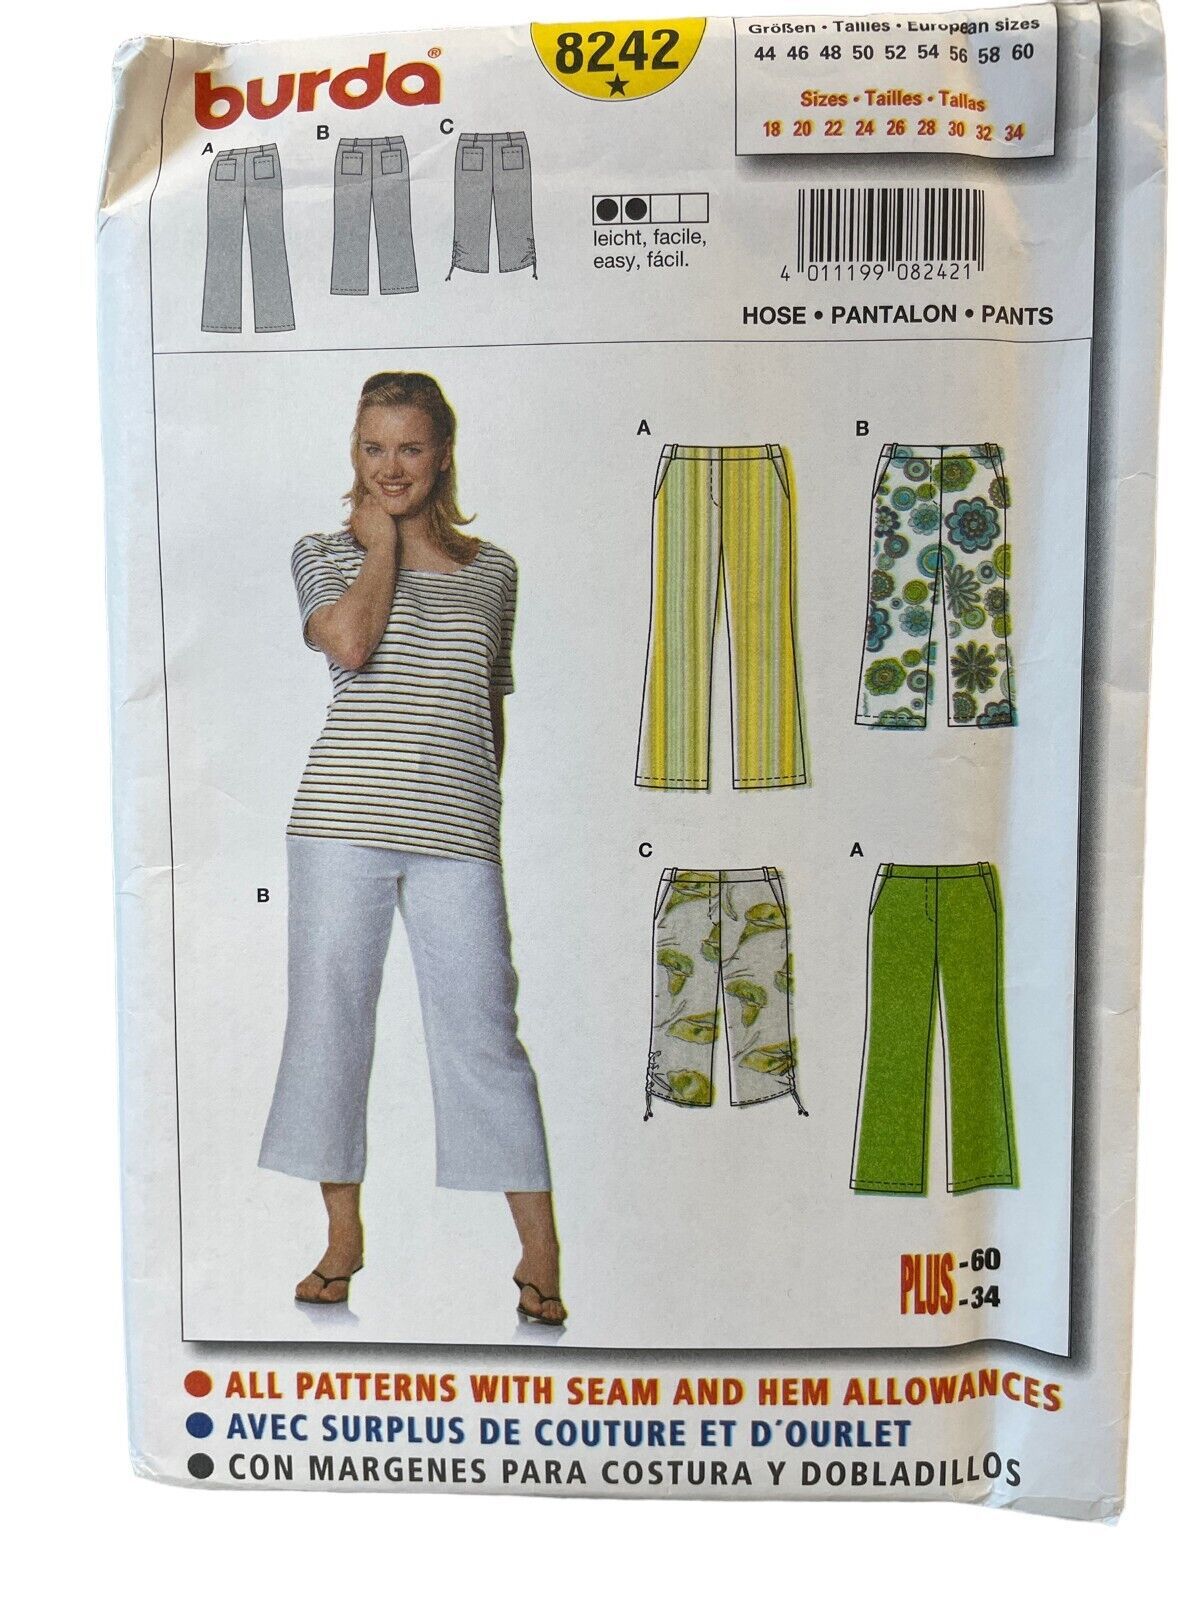 Primary image for Burda Sewing Pattern 8242 Pants Capris Misses Size 18-34